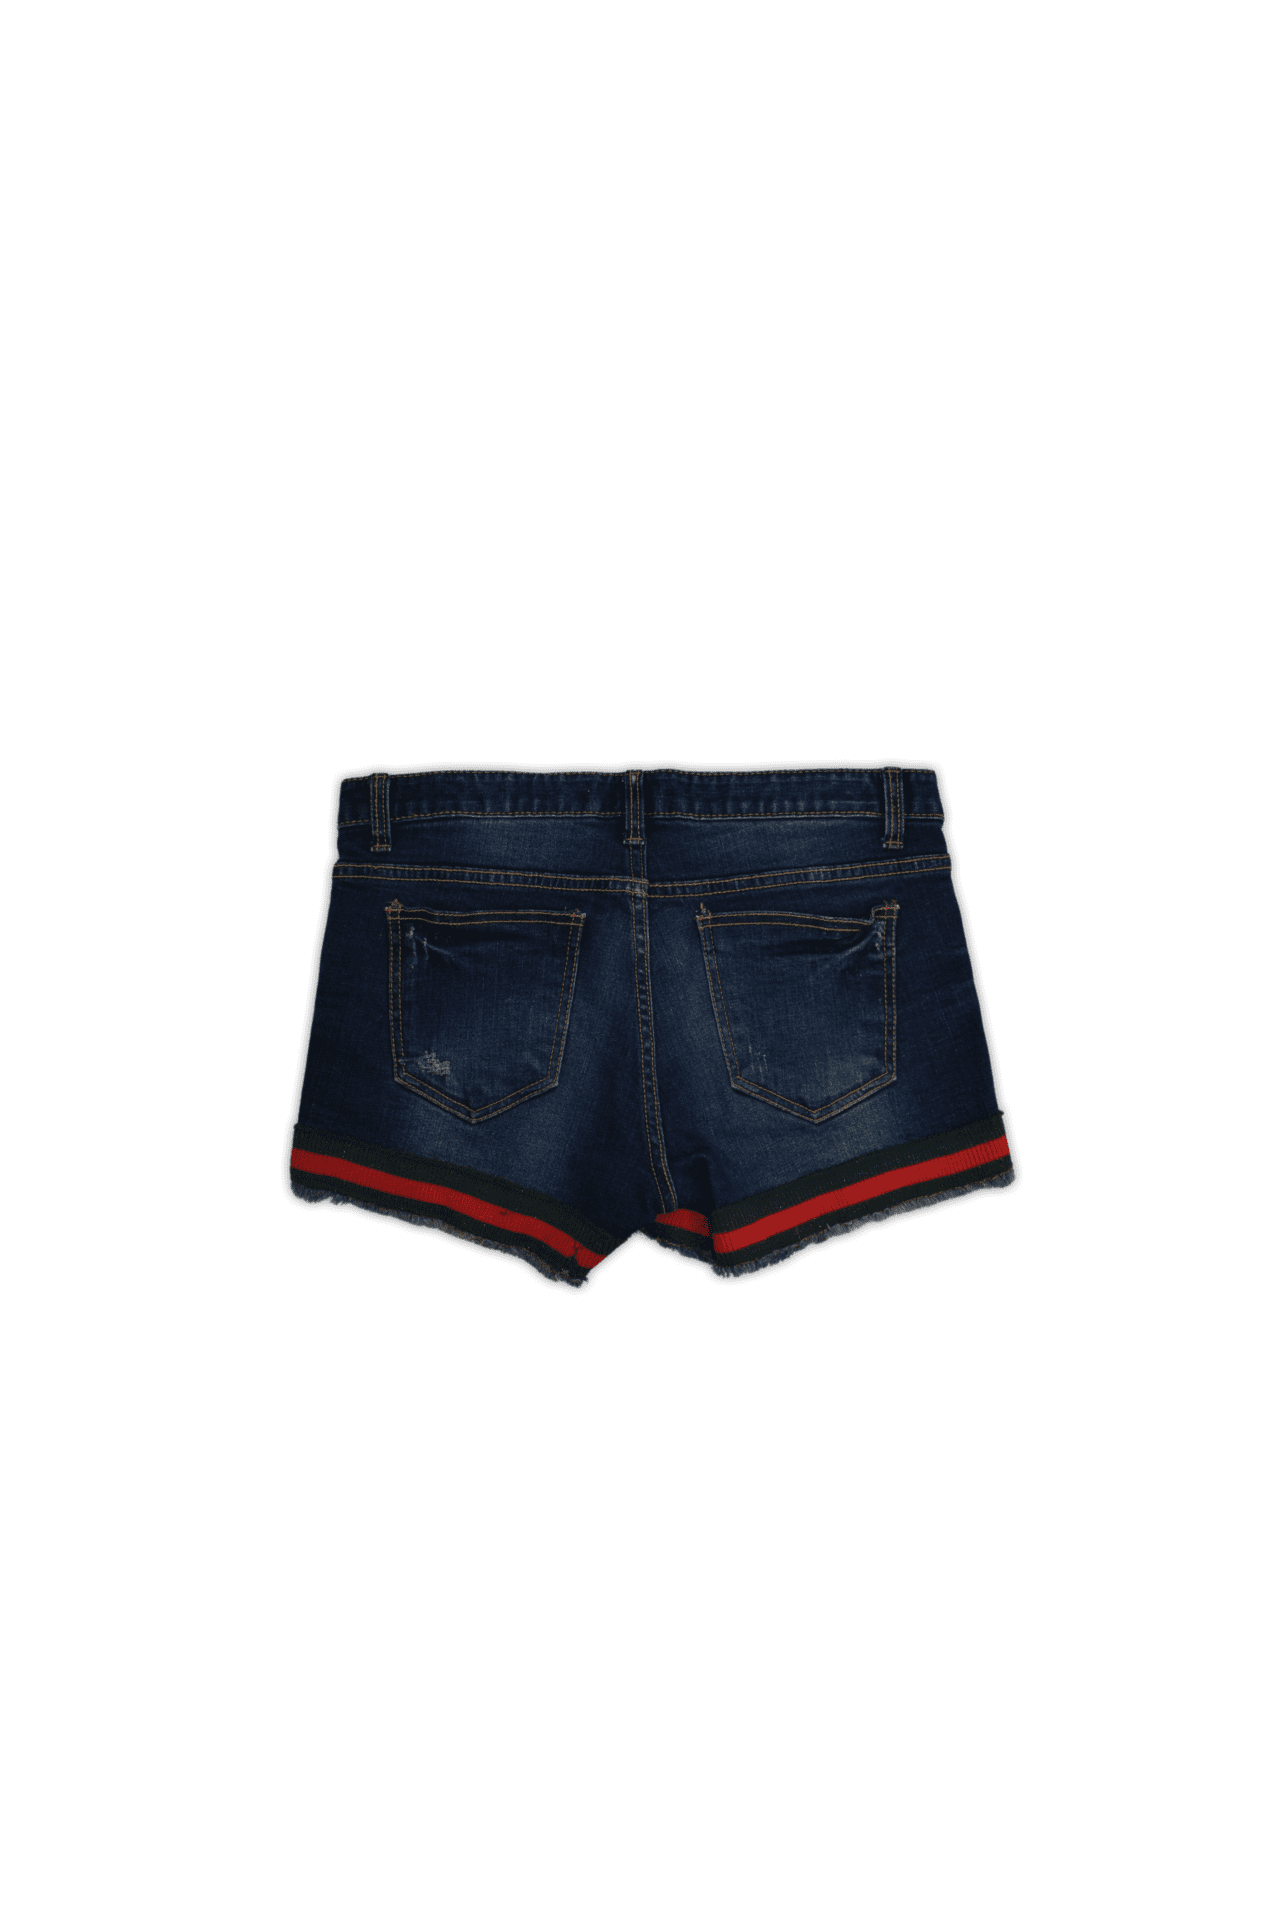 Mini shorts with frayed hem and contrast trim. 